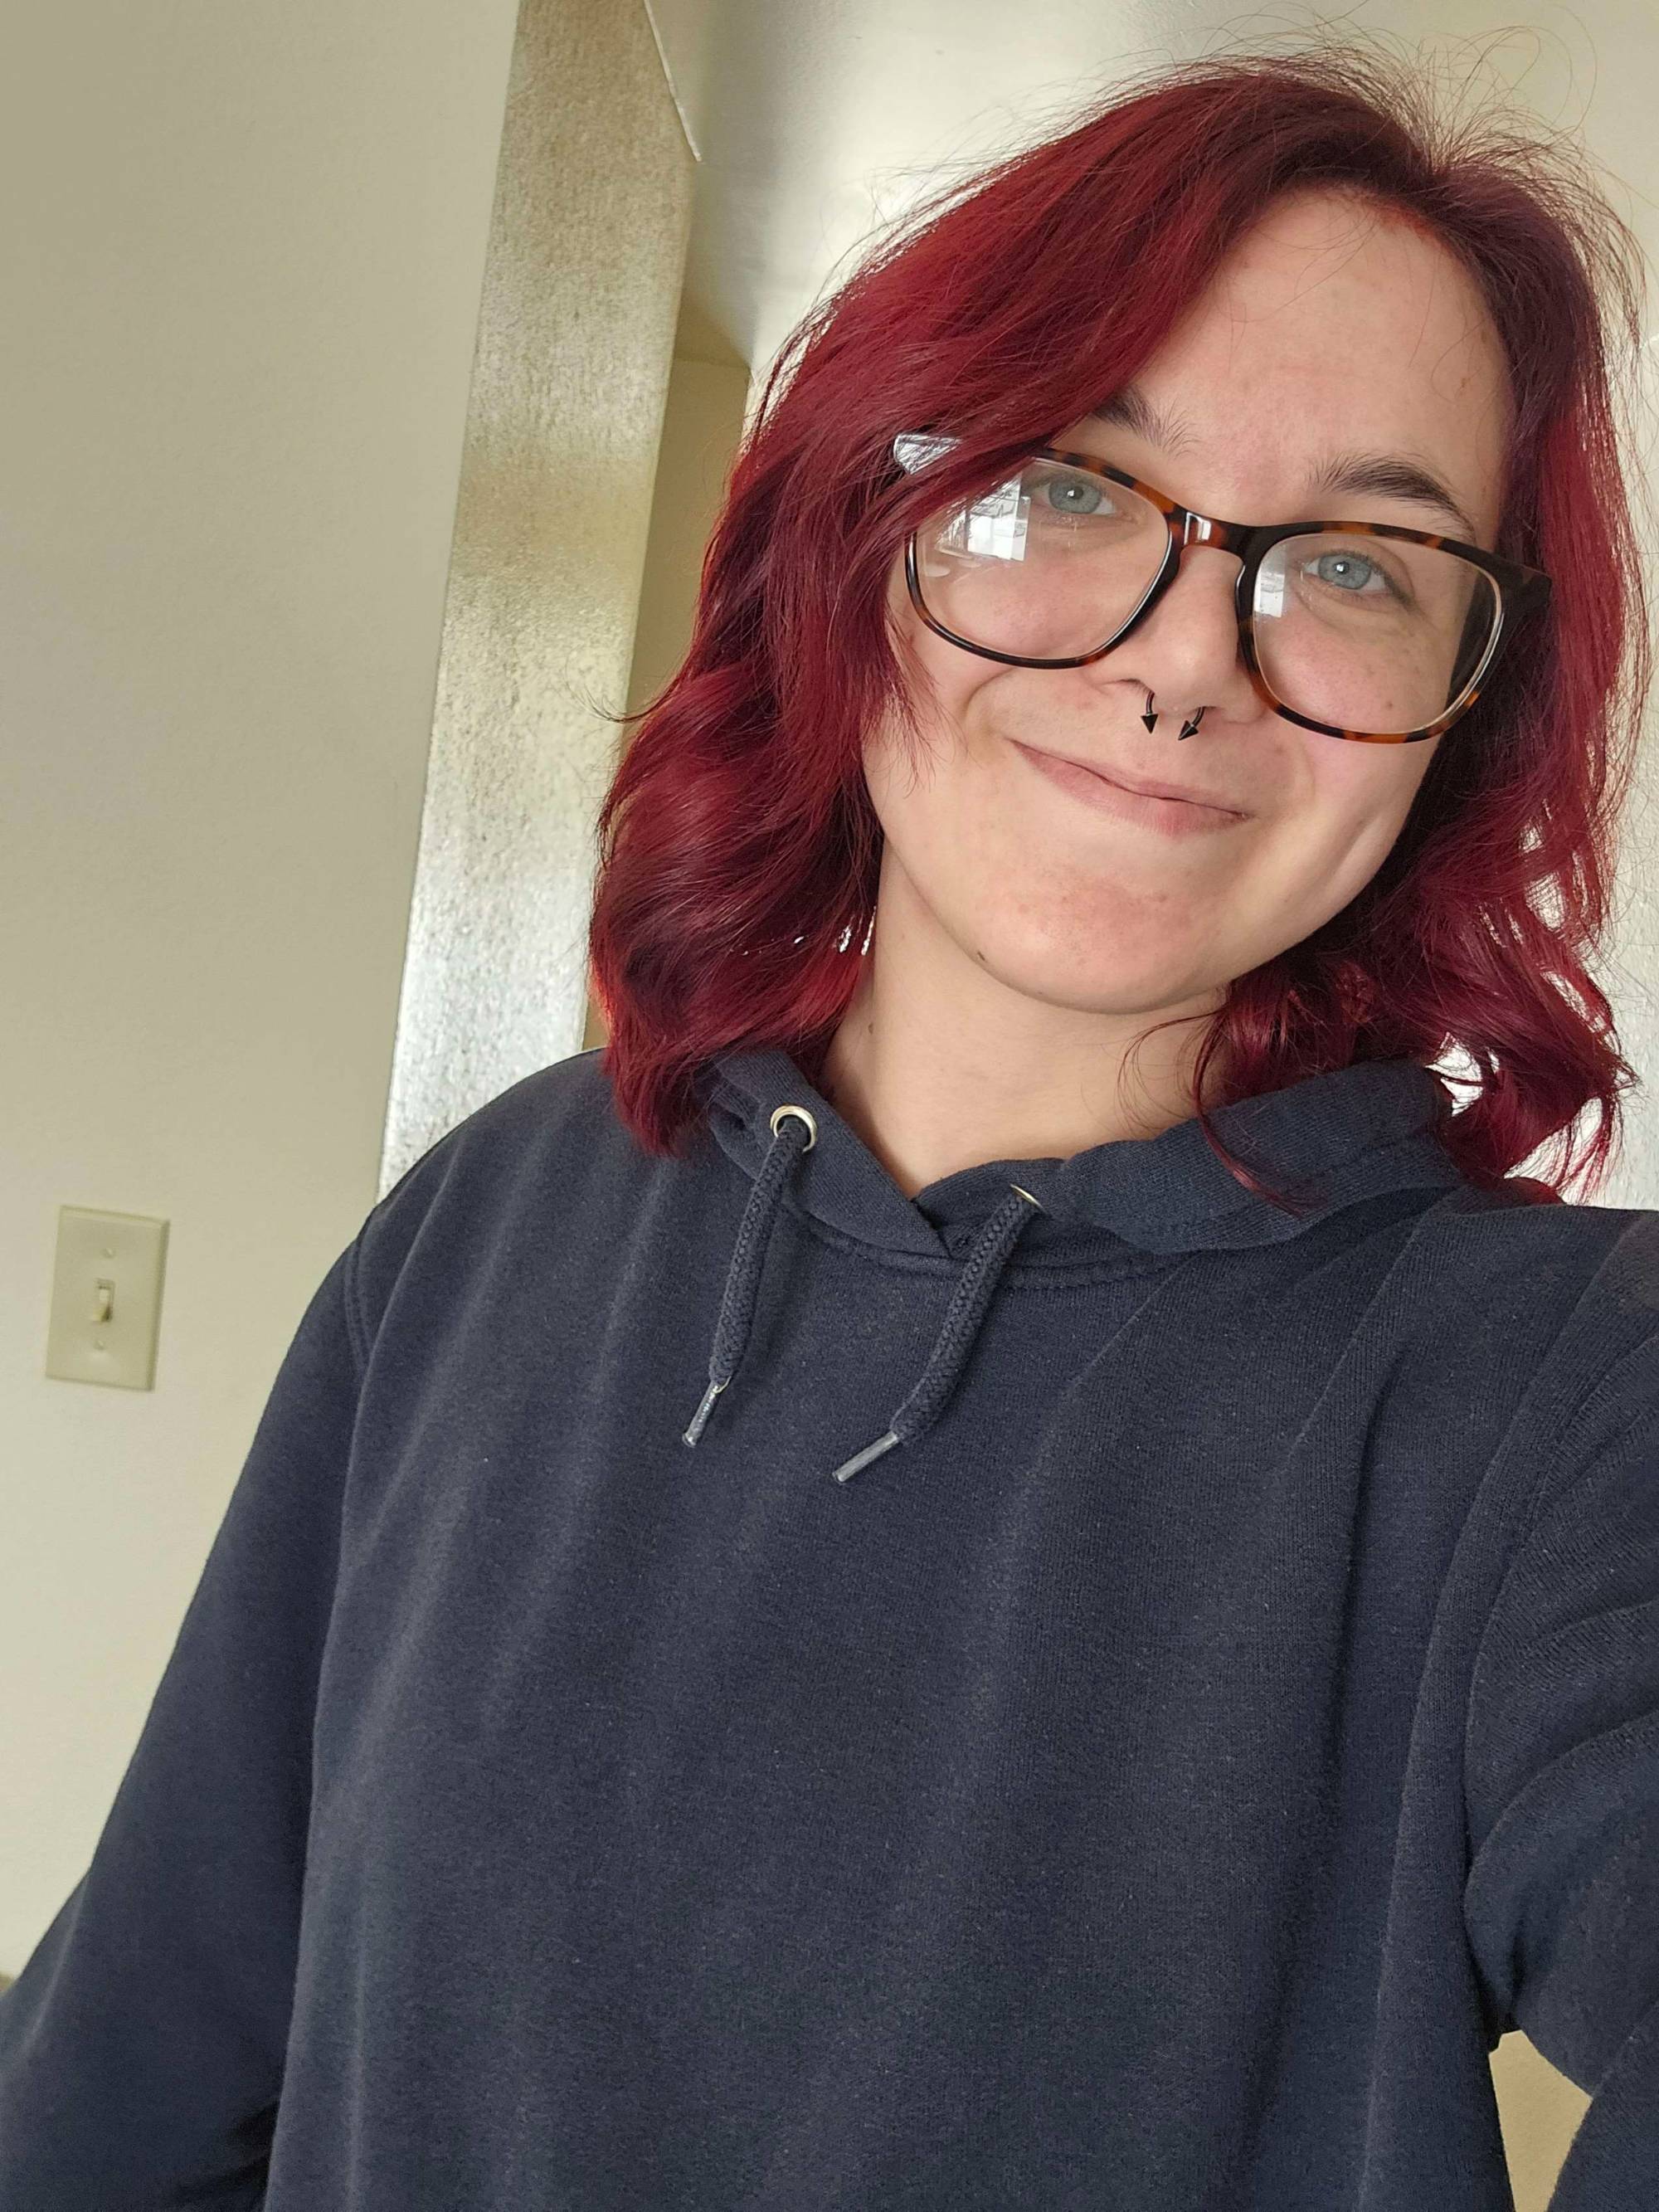 Girl with glasses and curly red hair smiling at the camera